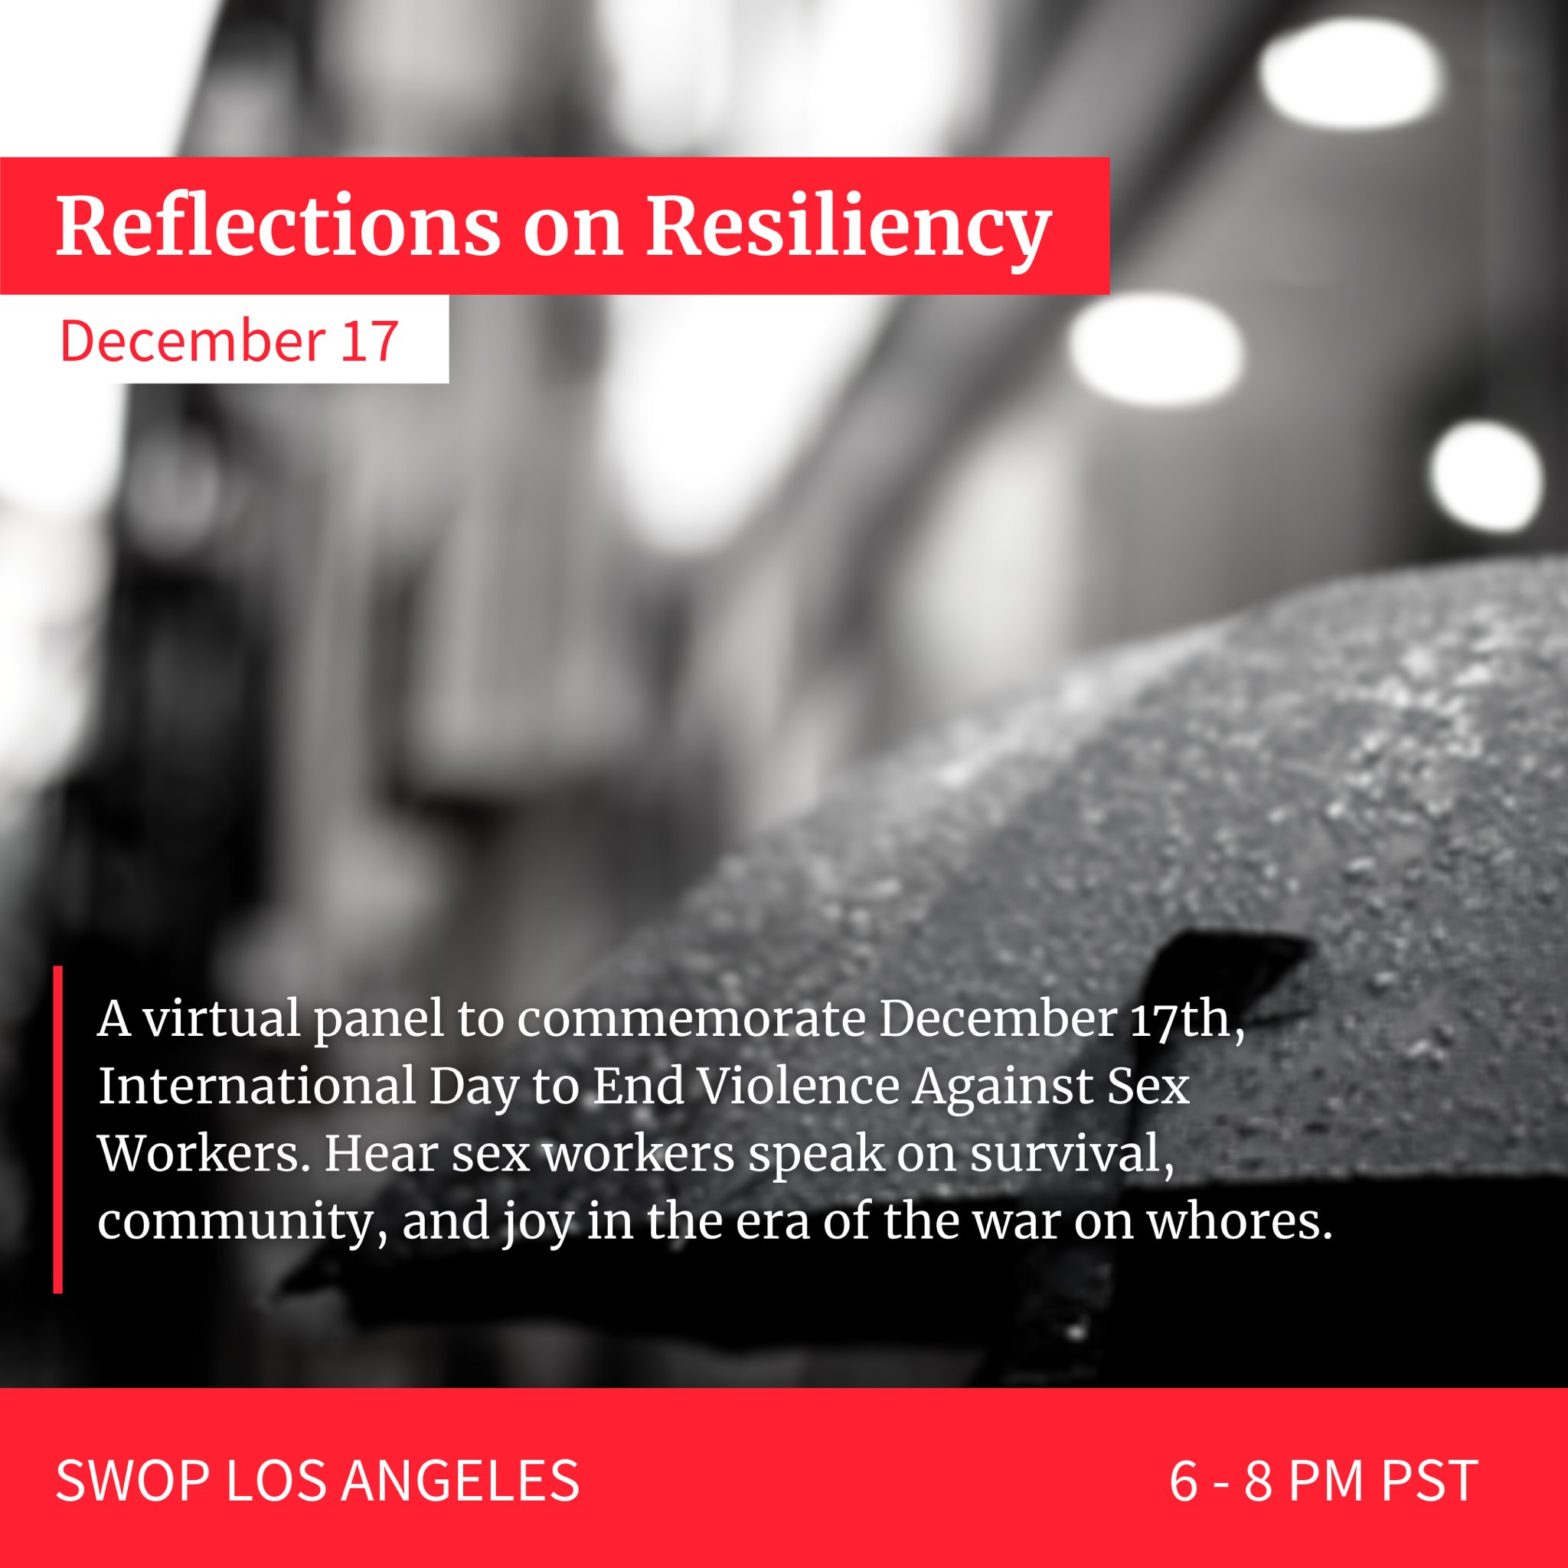 graphic over a black and white image of an umbrella reads: Reflections on Resiliency December 17 A virtual panel to commemorate December 17th, International Day to End Violence Against Sex Workers. Hear sex workers speak on survival, community, and joy in the era of the war on whores. SWOP LOS ANGELES       6 - 8 PM PST